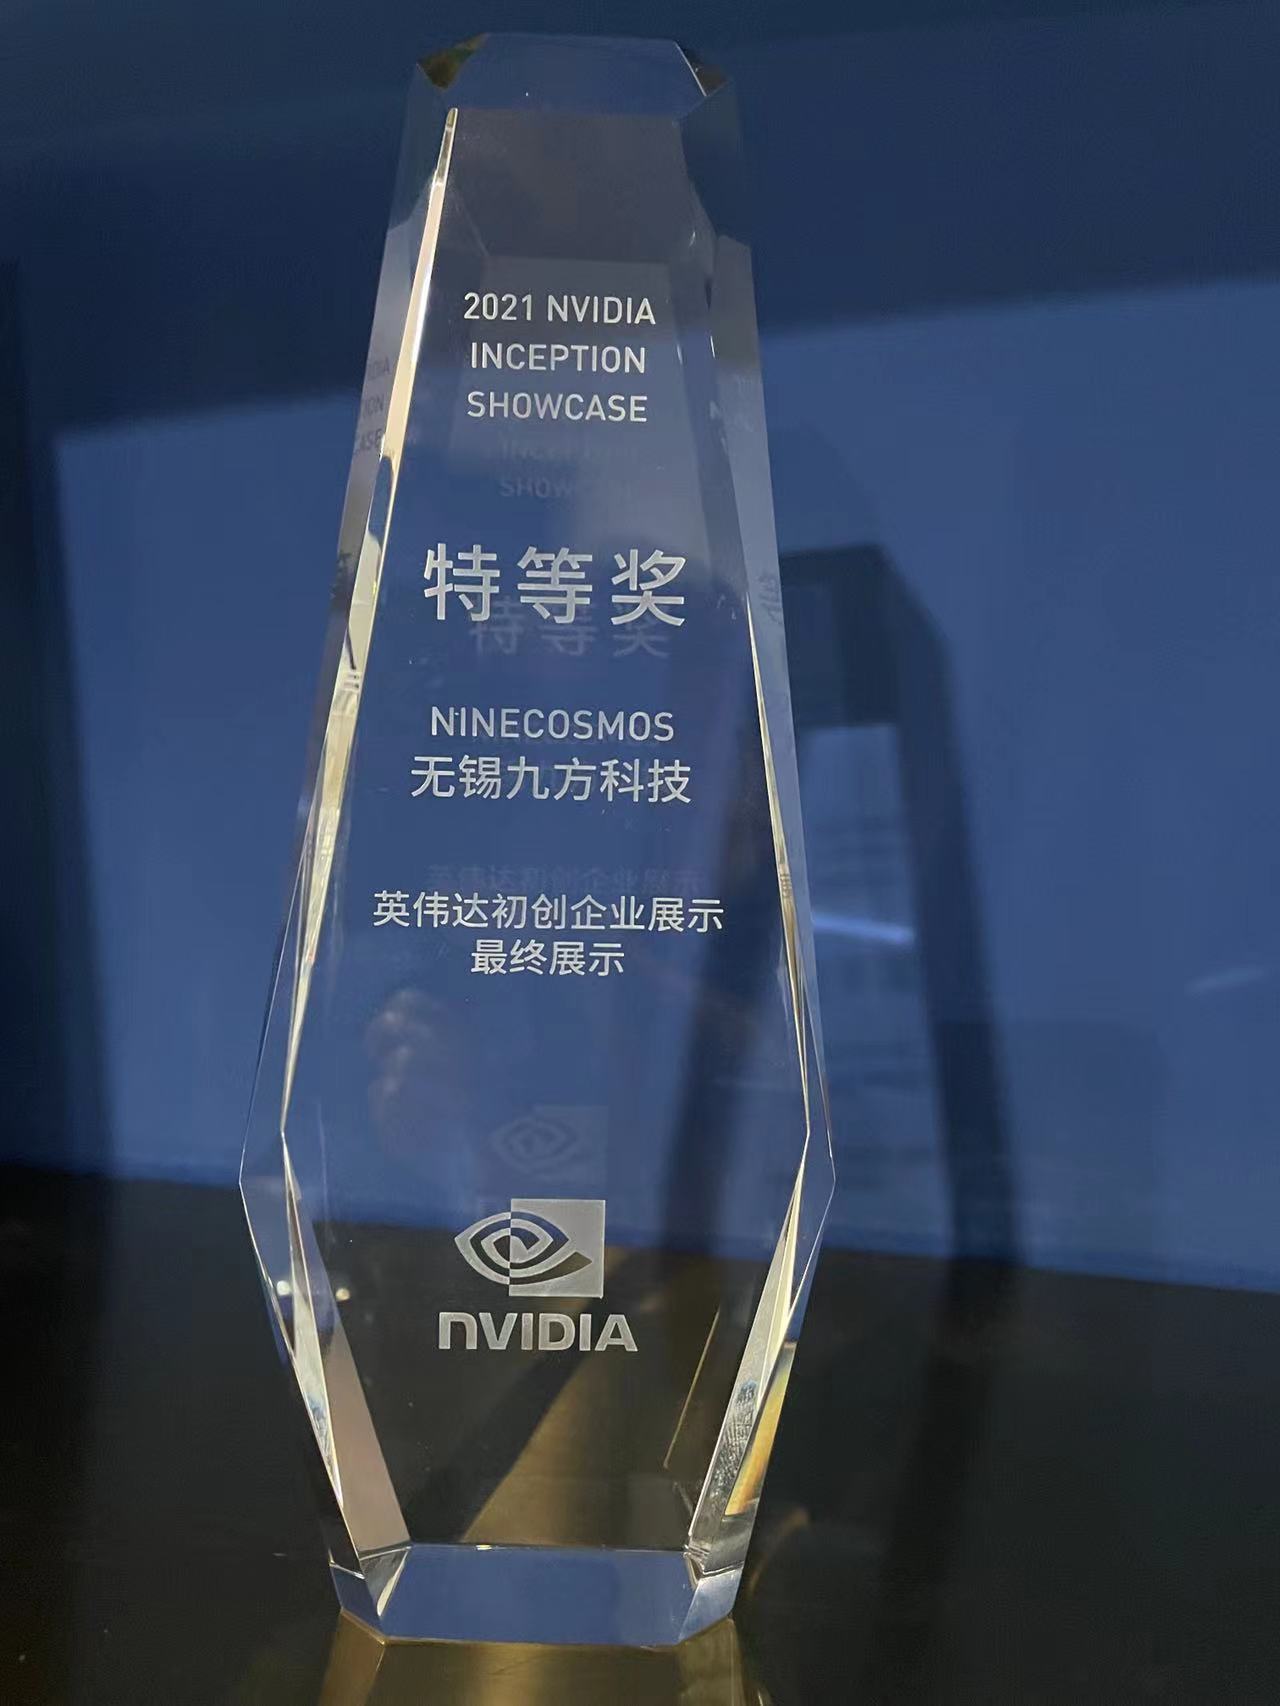 Ninecosmos Science And Technology won the Grand Prize at the Nvidia Start-up National Final Showcase